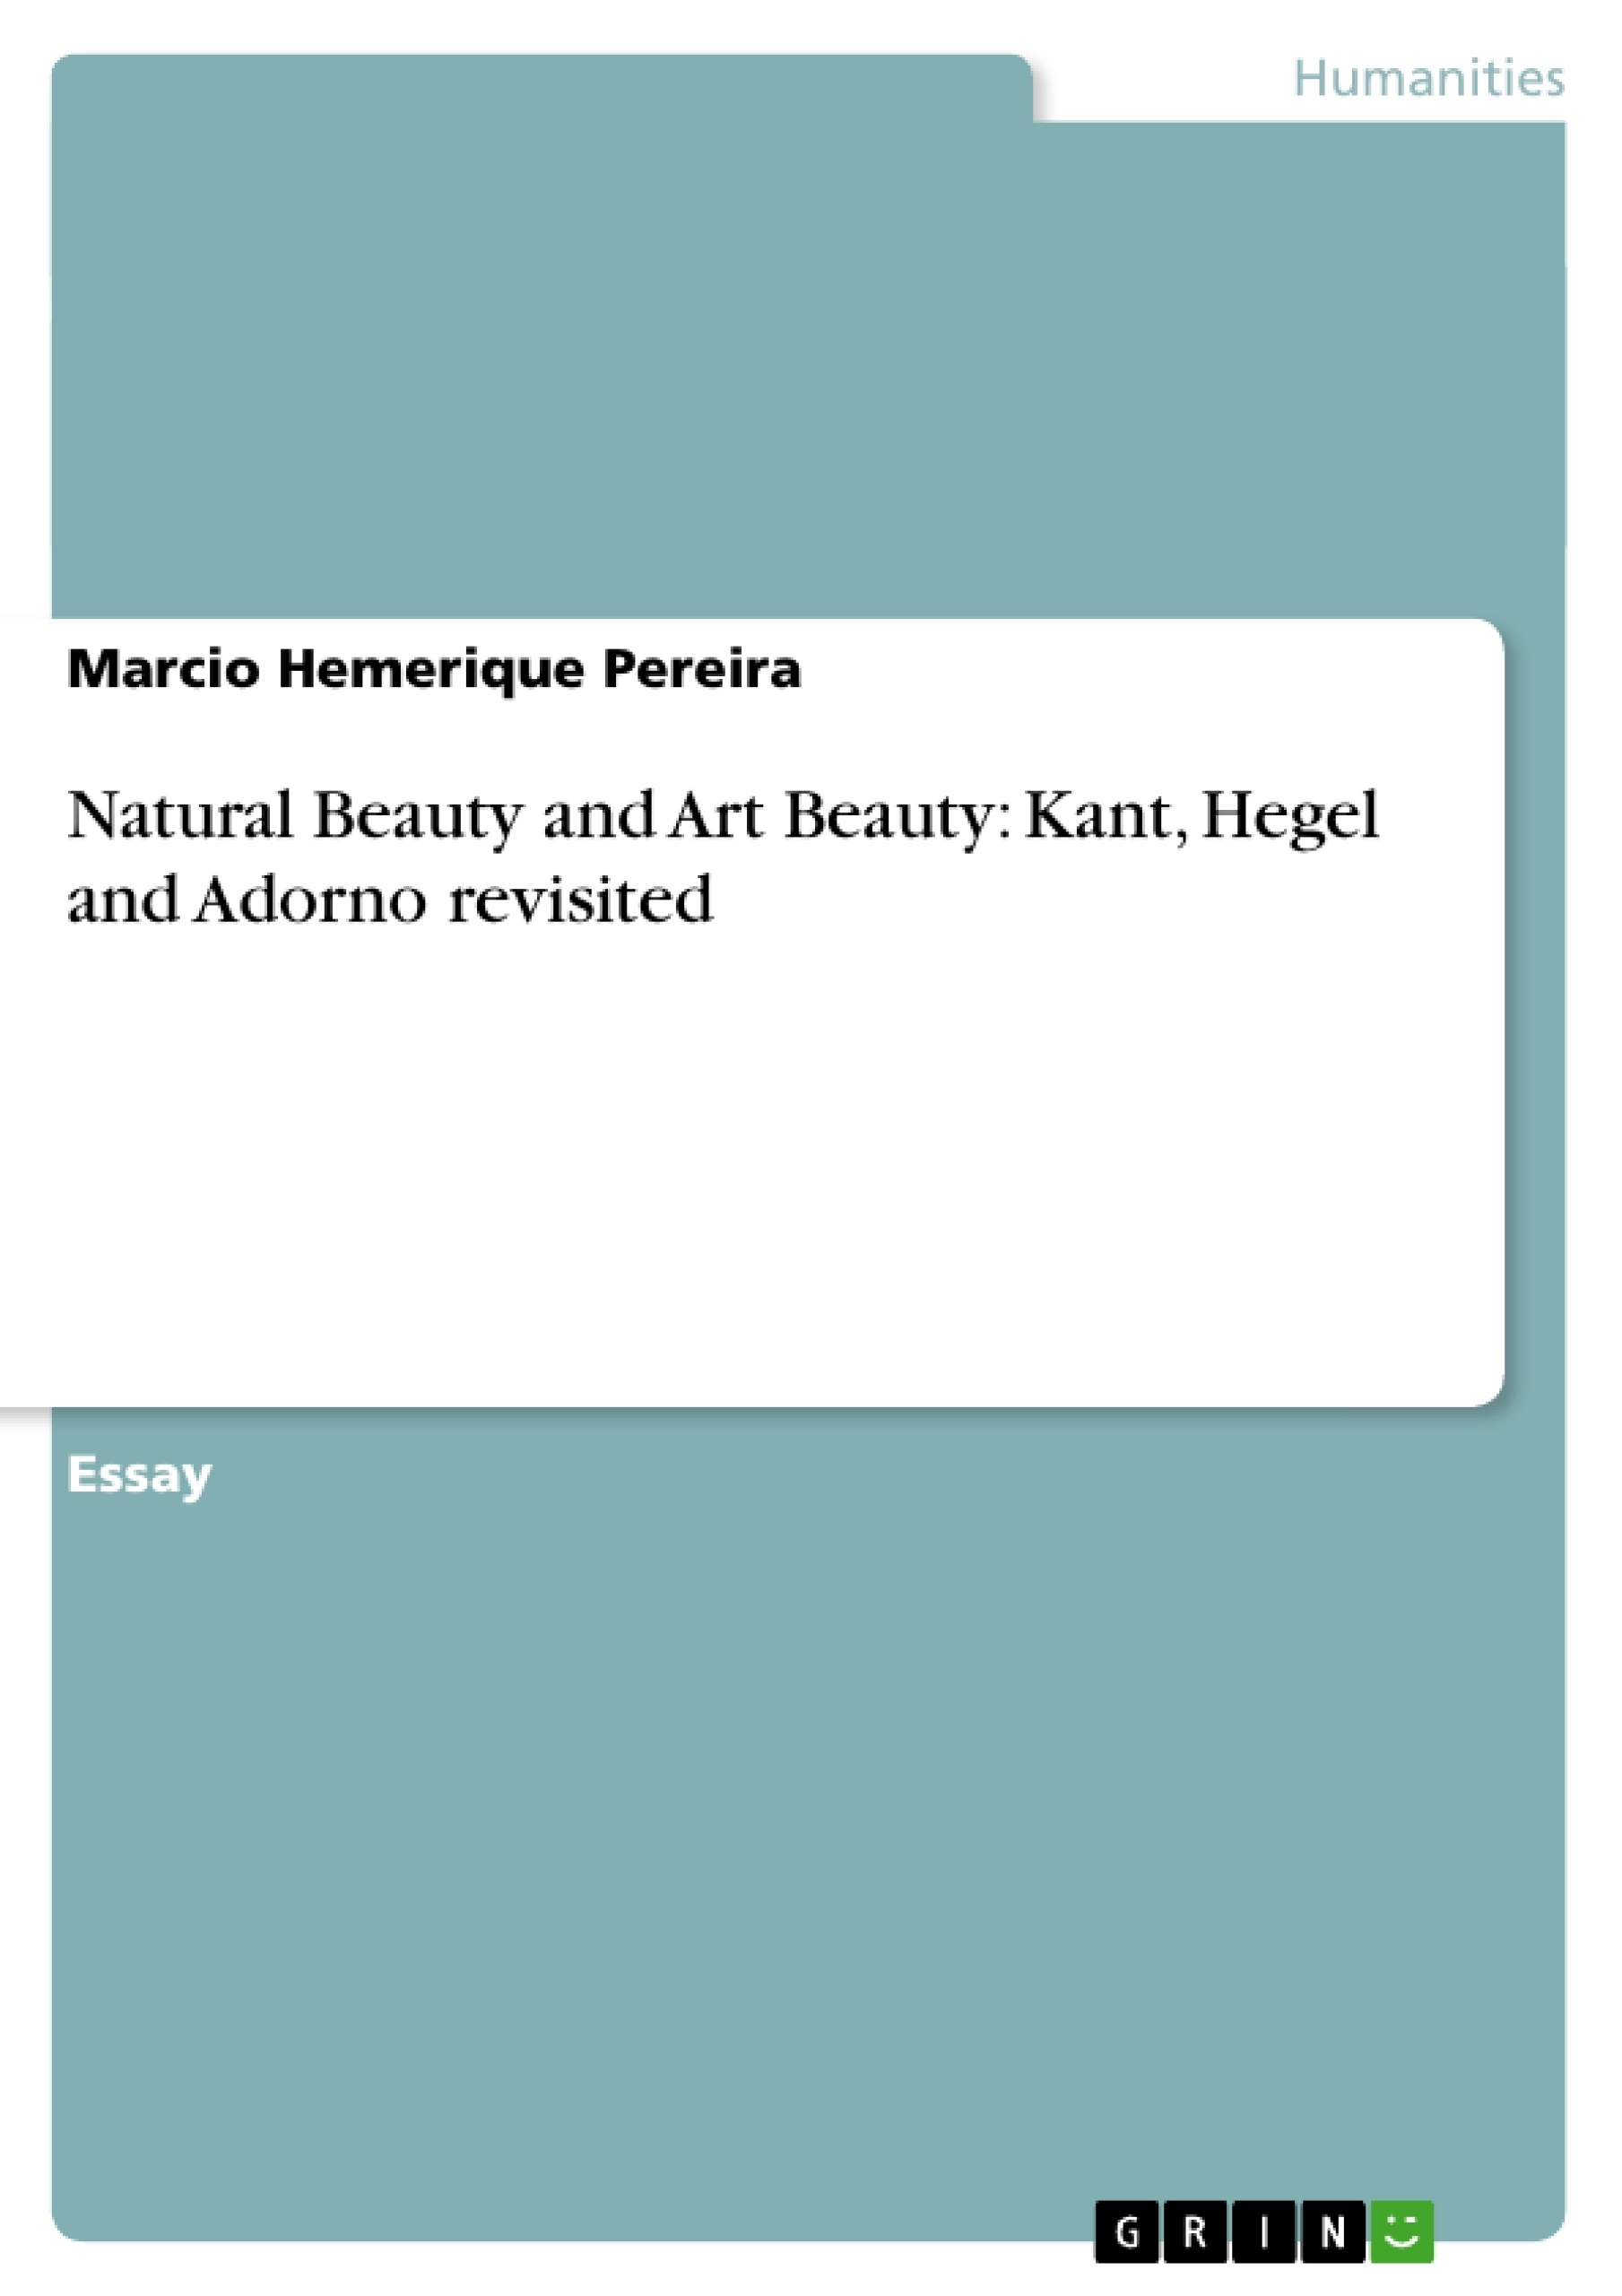 Title: Natural Beauty and Art Beauty: Kant, Hegel and Adorno revisited